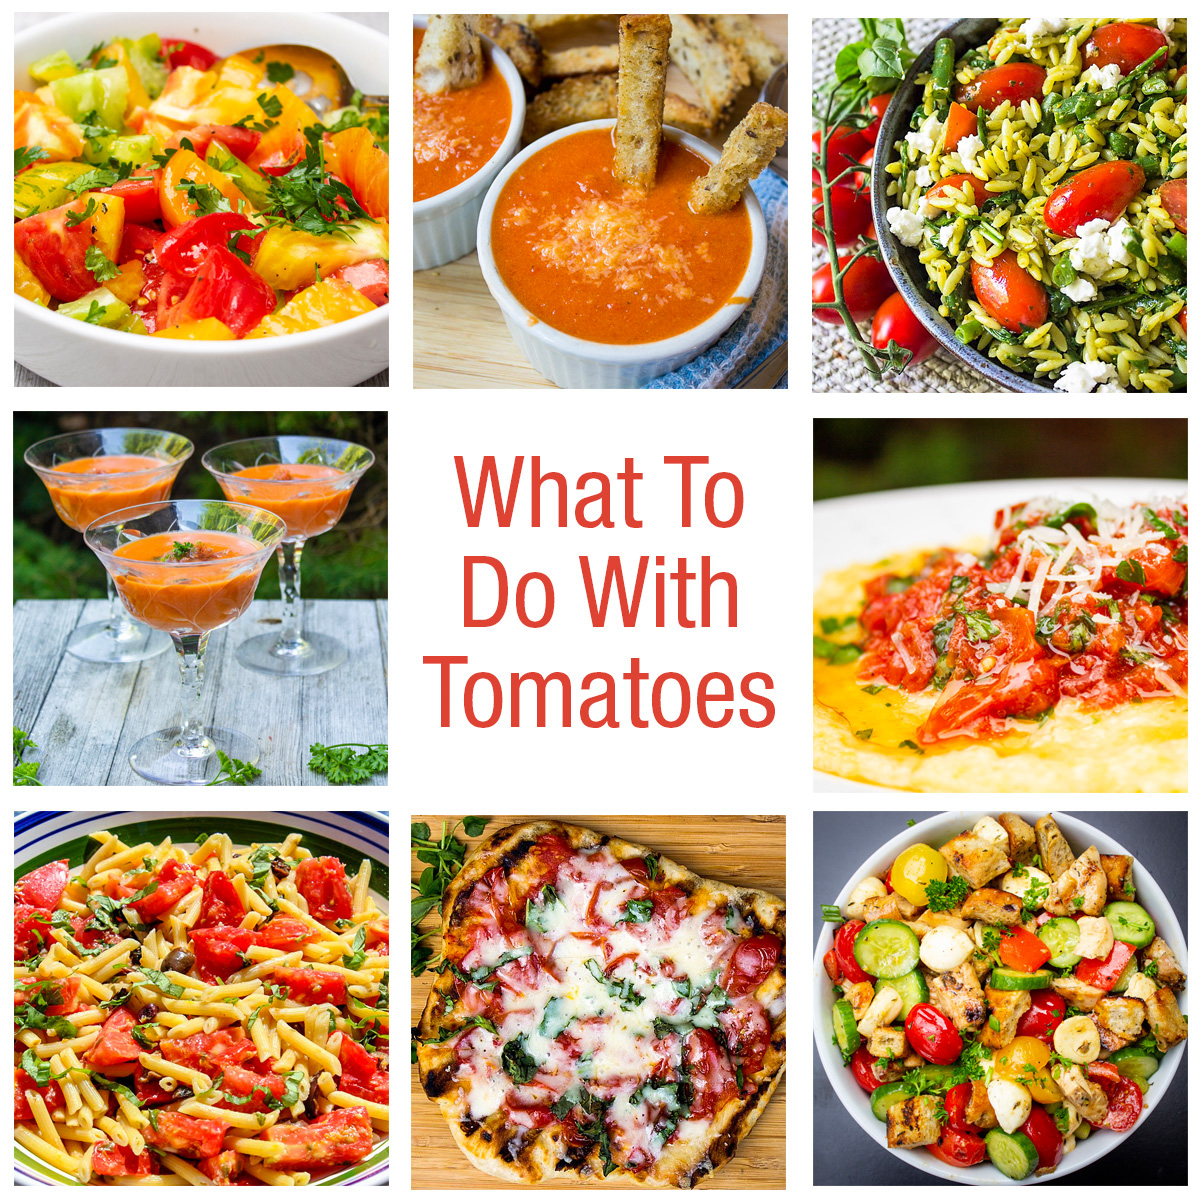 What To Do With Tomatoes (19 Recipes and Tips 2022)